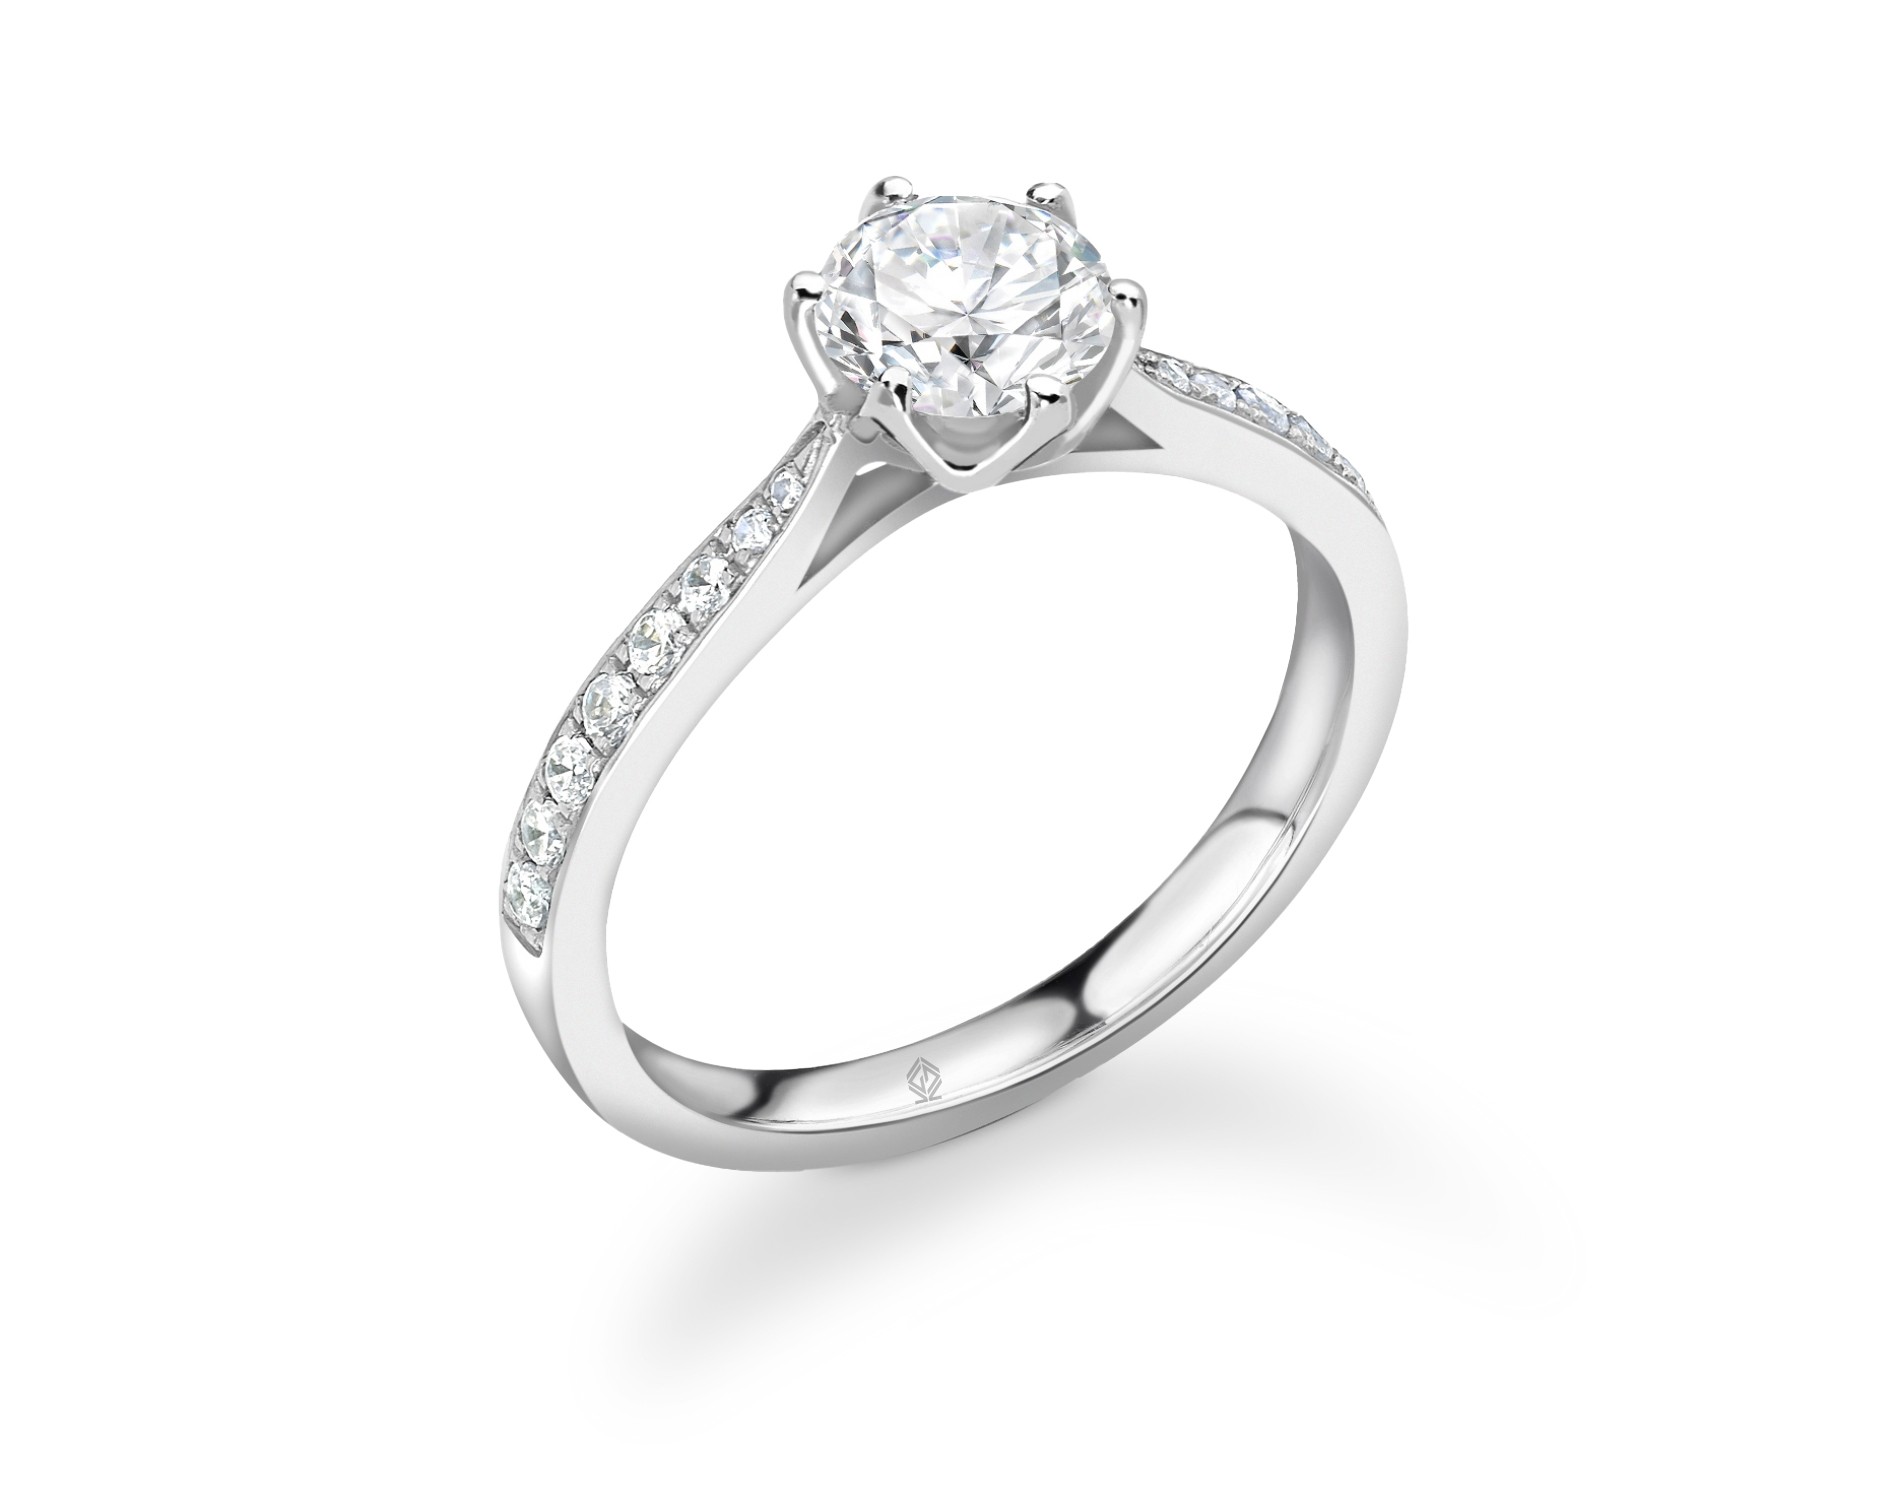 18K WHITE GOLD ROUND CUT 6 PRONGS DIAMOND ENGAGEMENT RING WITH SIDE STONES CHANNEL SET